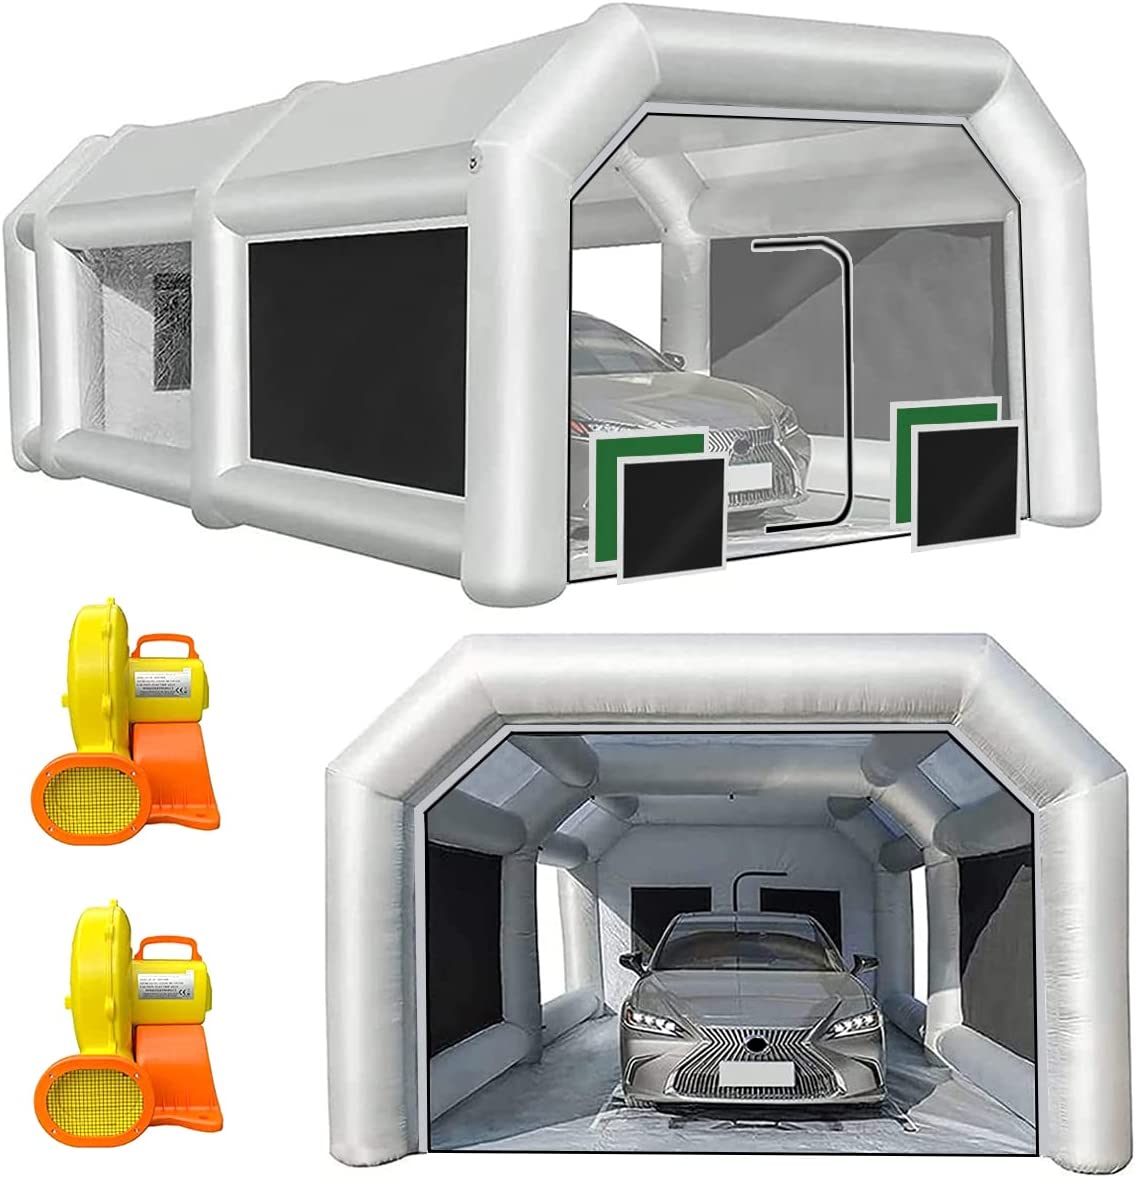 Best Deal for Inflatable Spray Booth with Filter System Portable Car